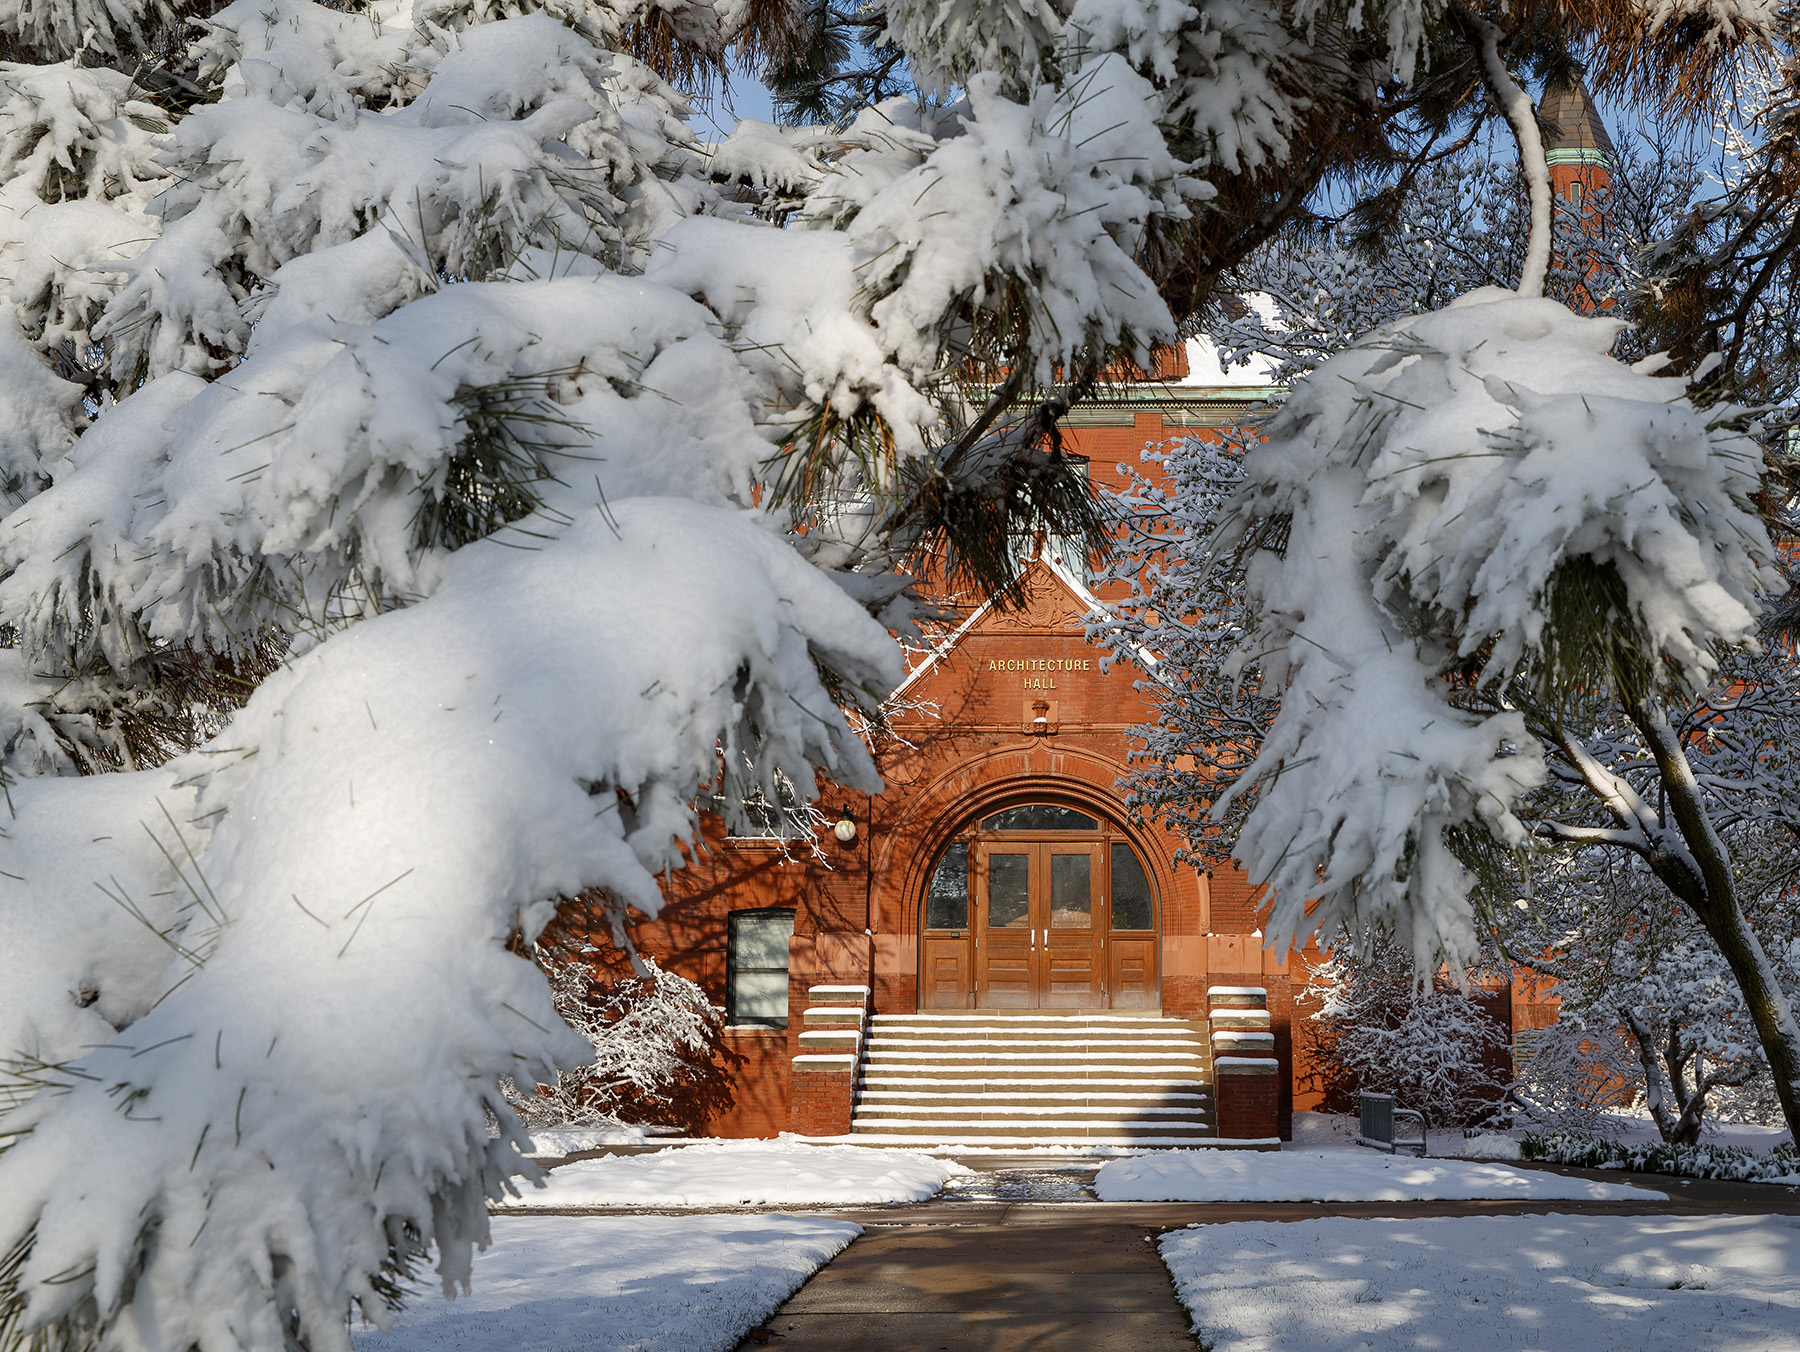 Snow-covered trees frame the entrance to Architecture Hall [University Communication].